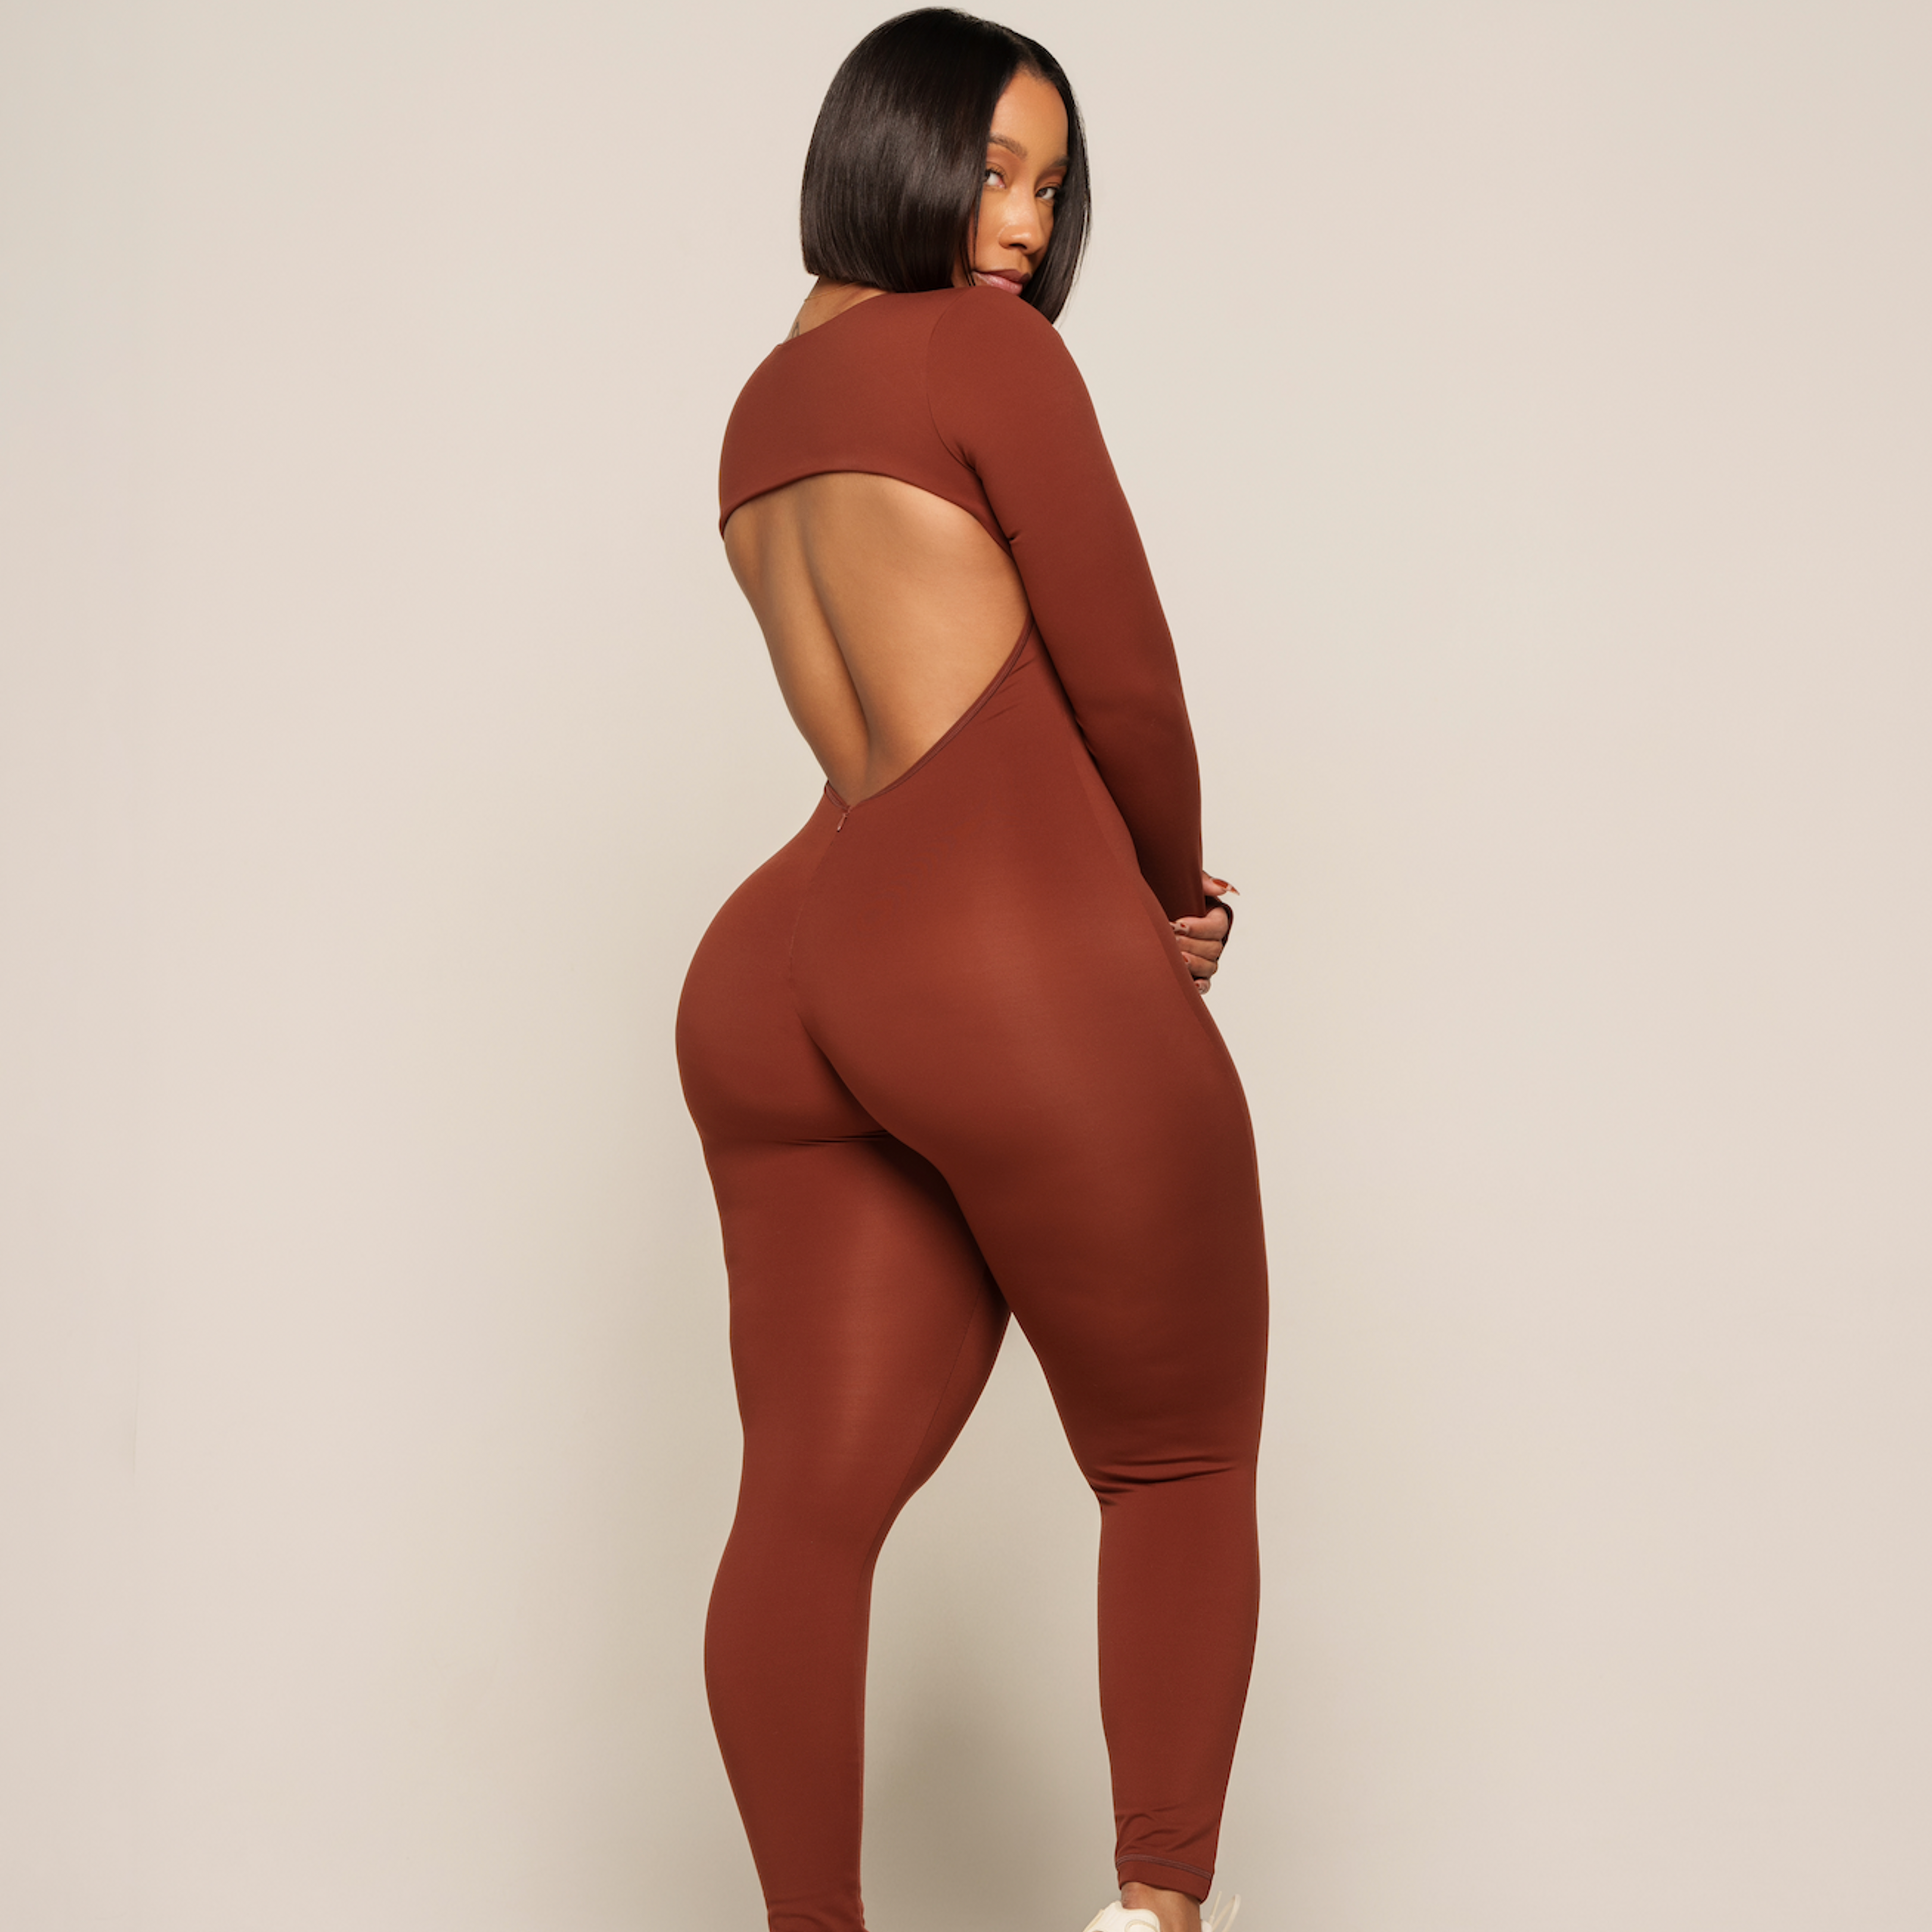 https://cdn.prod.marmalade.co/products/3840x3840/filters:quality(80)/www.jsculptfitness.com%2Fproducts%2Fpre-sale-everyday-backless-long-sleeve-bodysuit%2F1708524786%2FScreenShot2024-02-21at7.51.15AM.png